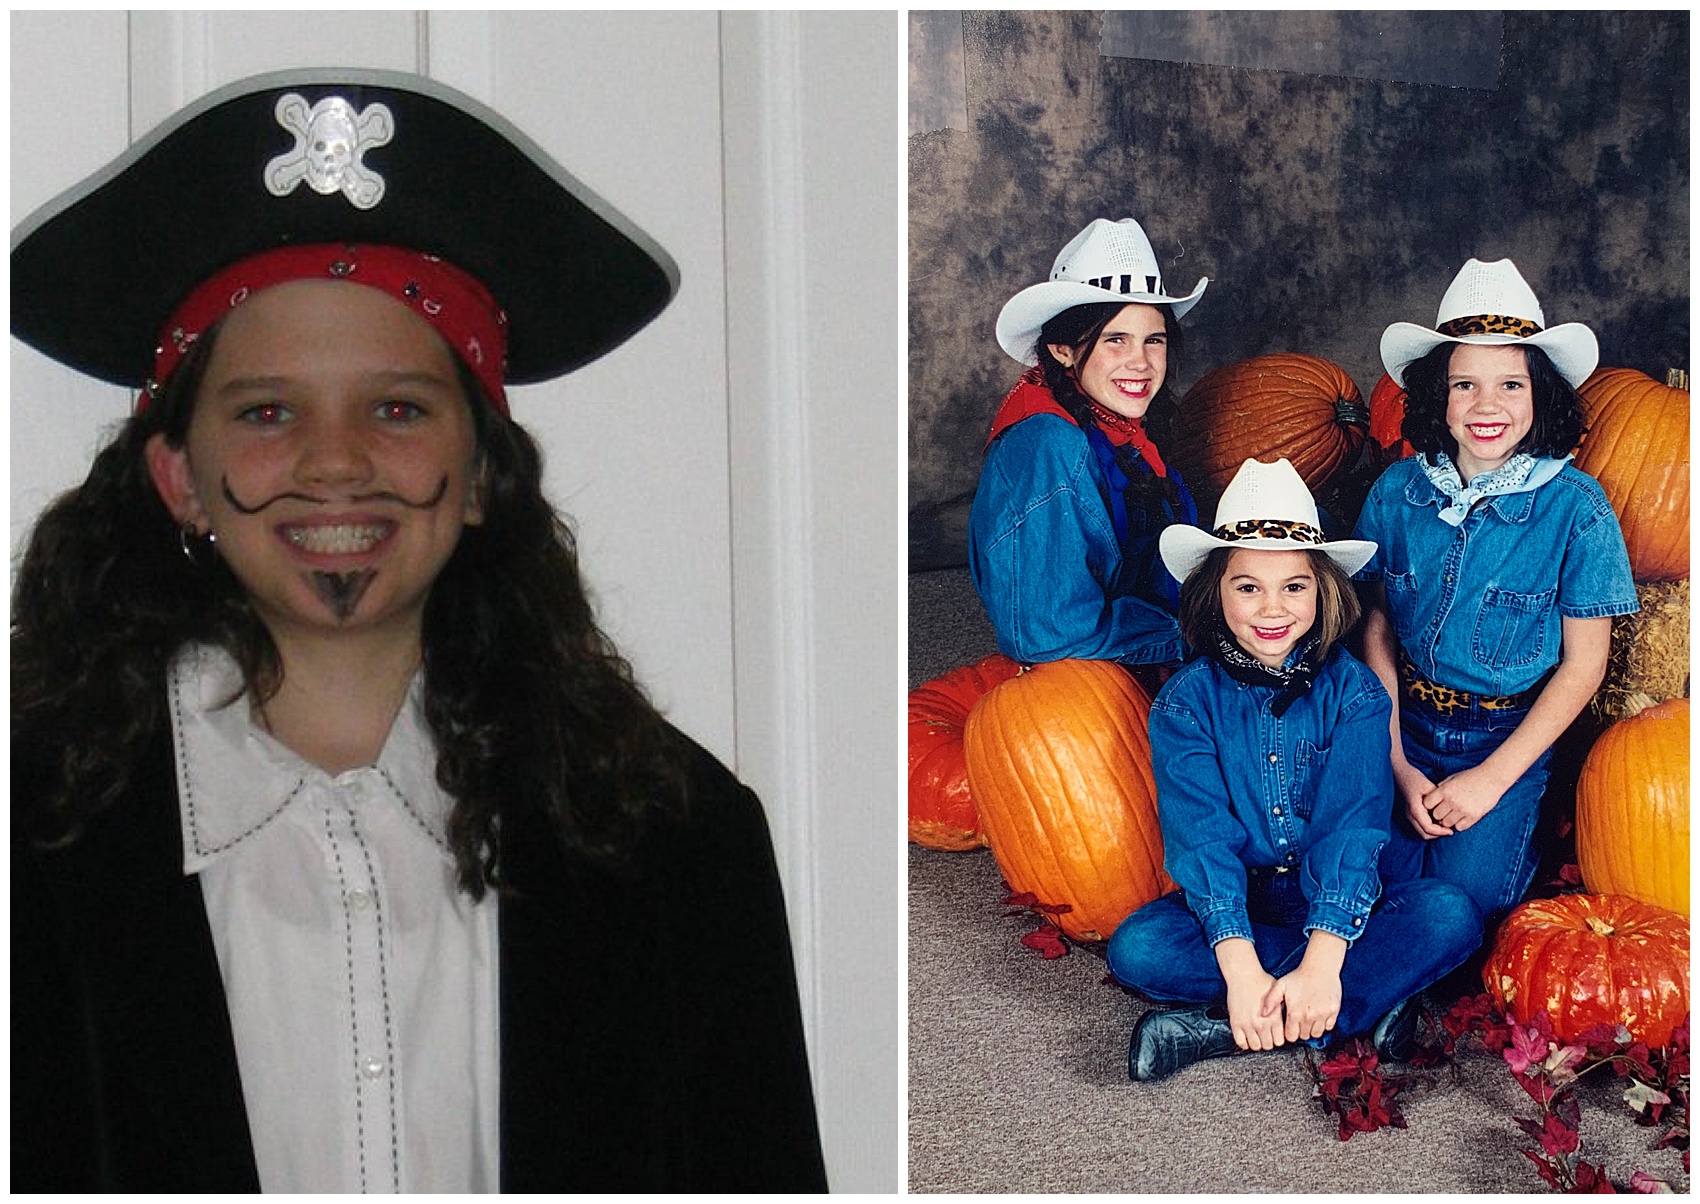 halloween photos of cowgirls and a pirate